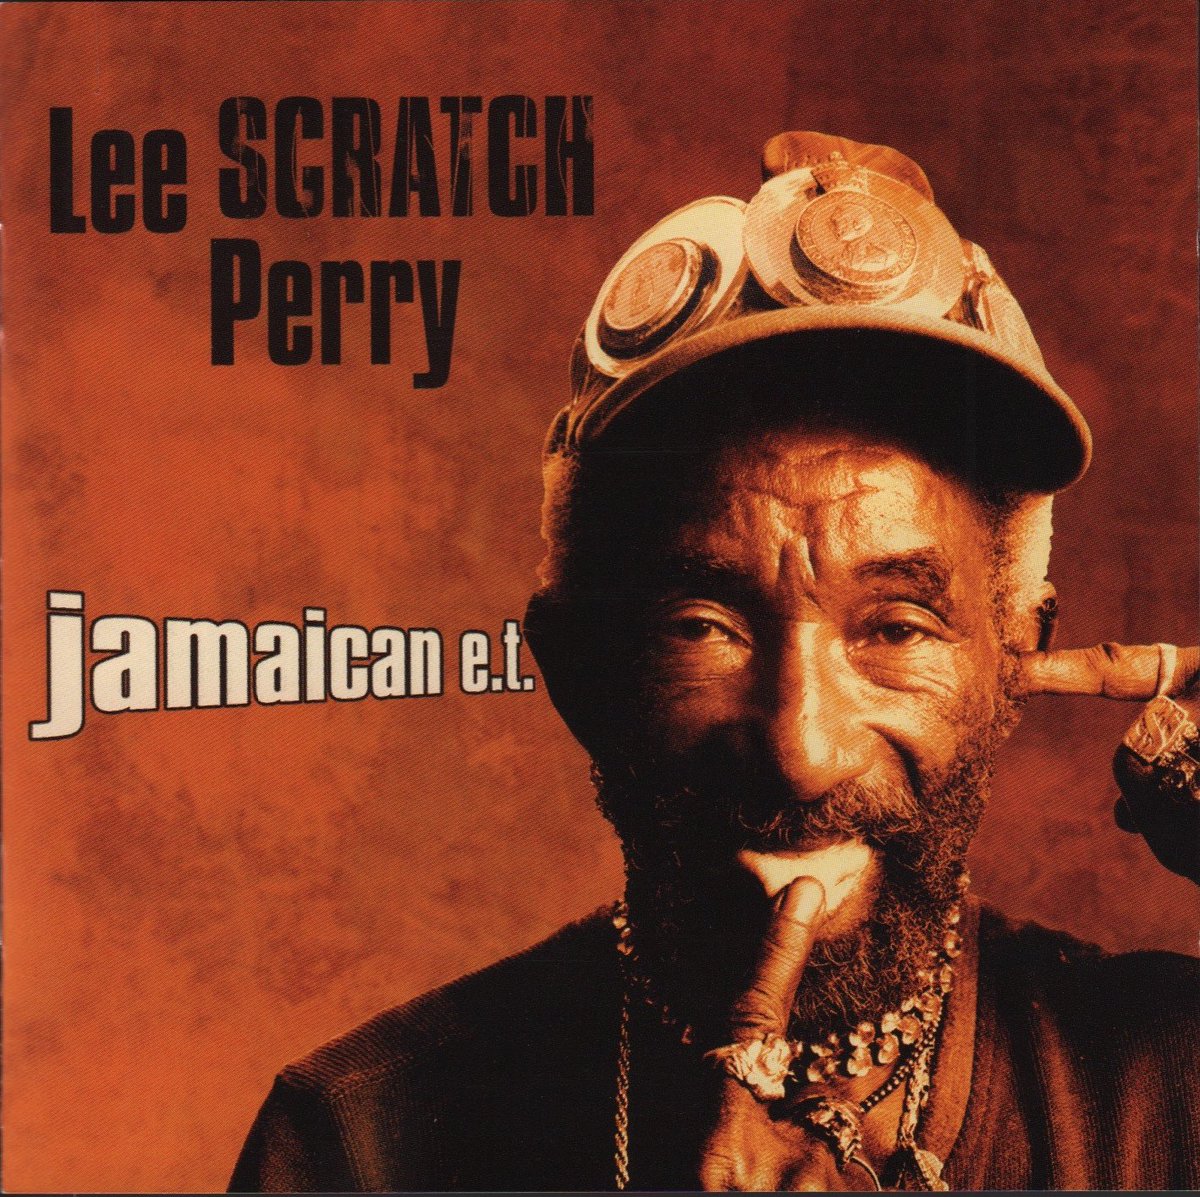 On this day 20 years ago, the legend that is #leescratchperry won the BEST REGGAE ALBUM #grammyaward for Jamaican E.T.

#onthisday #onthisdayinmusic #trojanrecords @ScratchLee